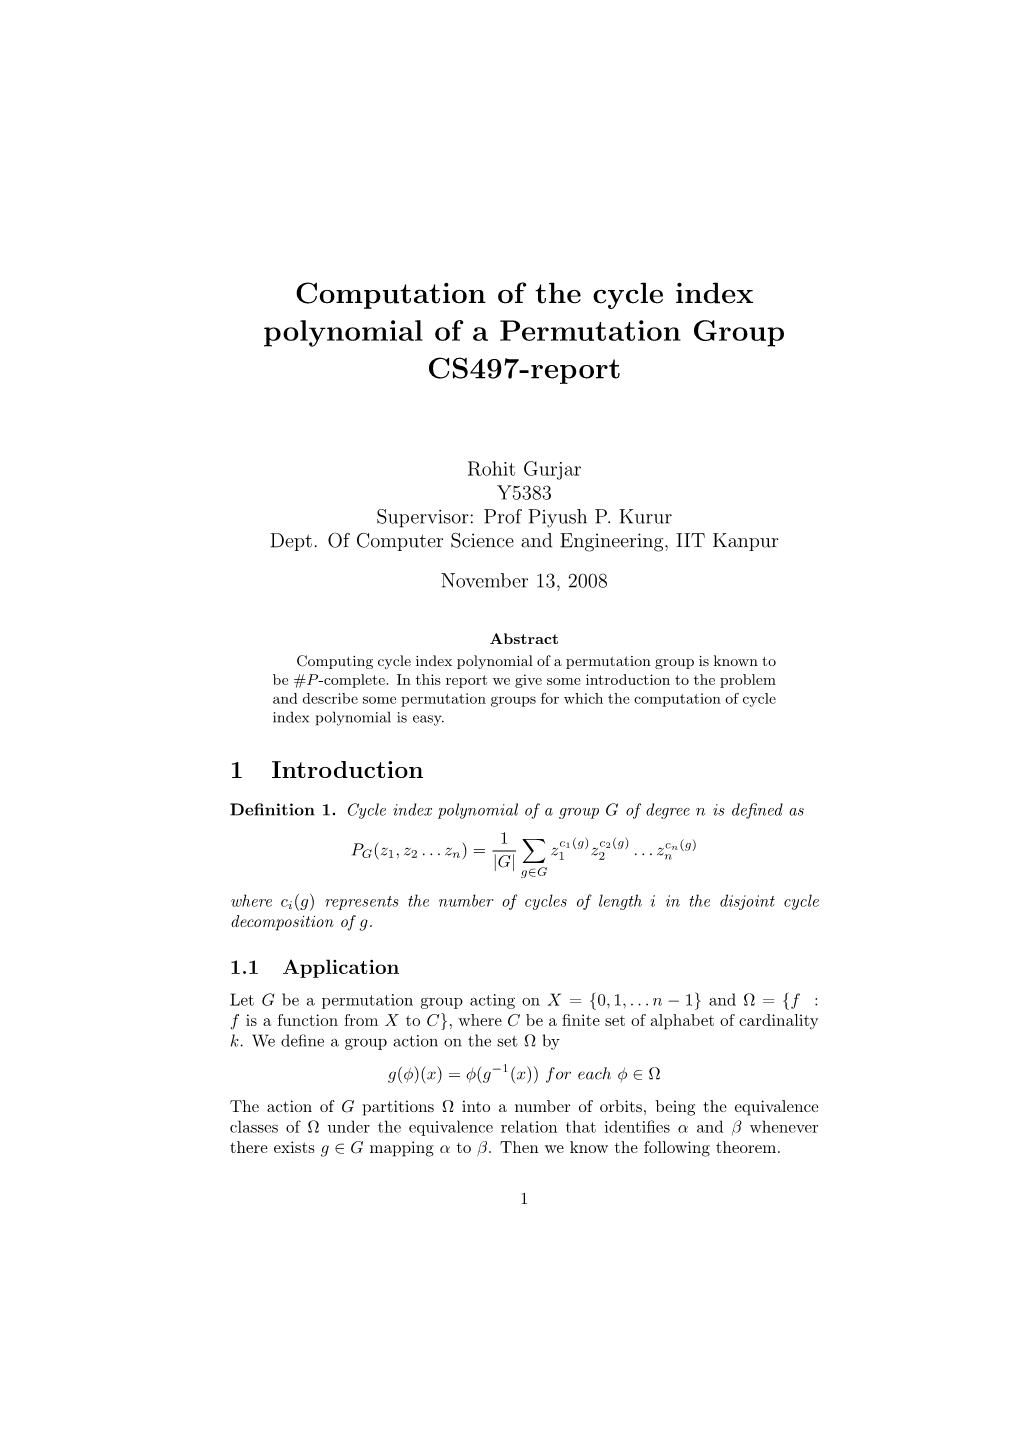 Computing Cycle Index Polynomial of a Permutation Group Is Known to Be #P -Complete